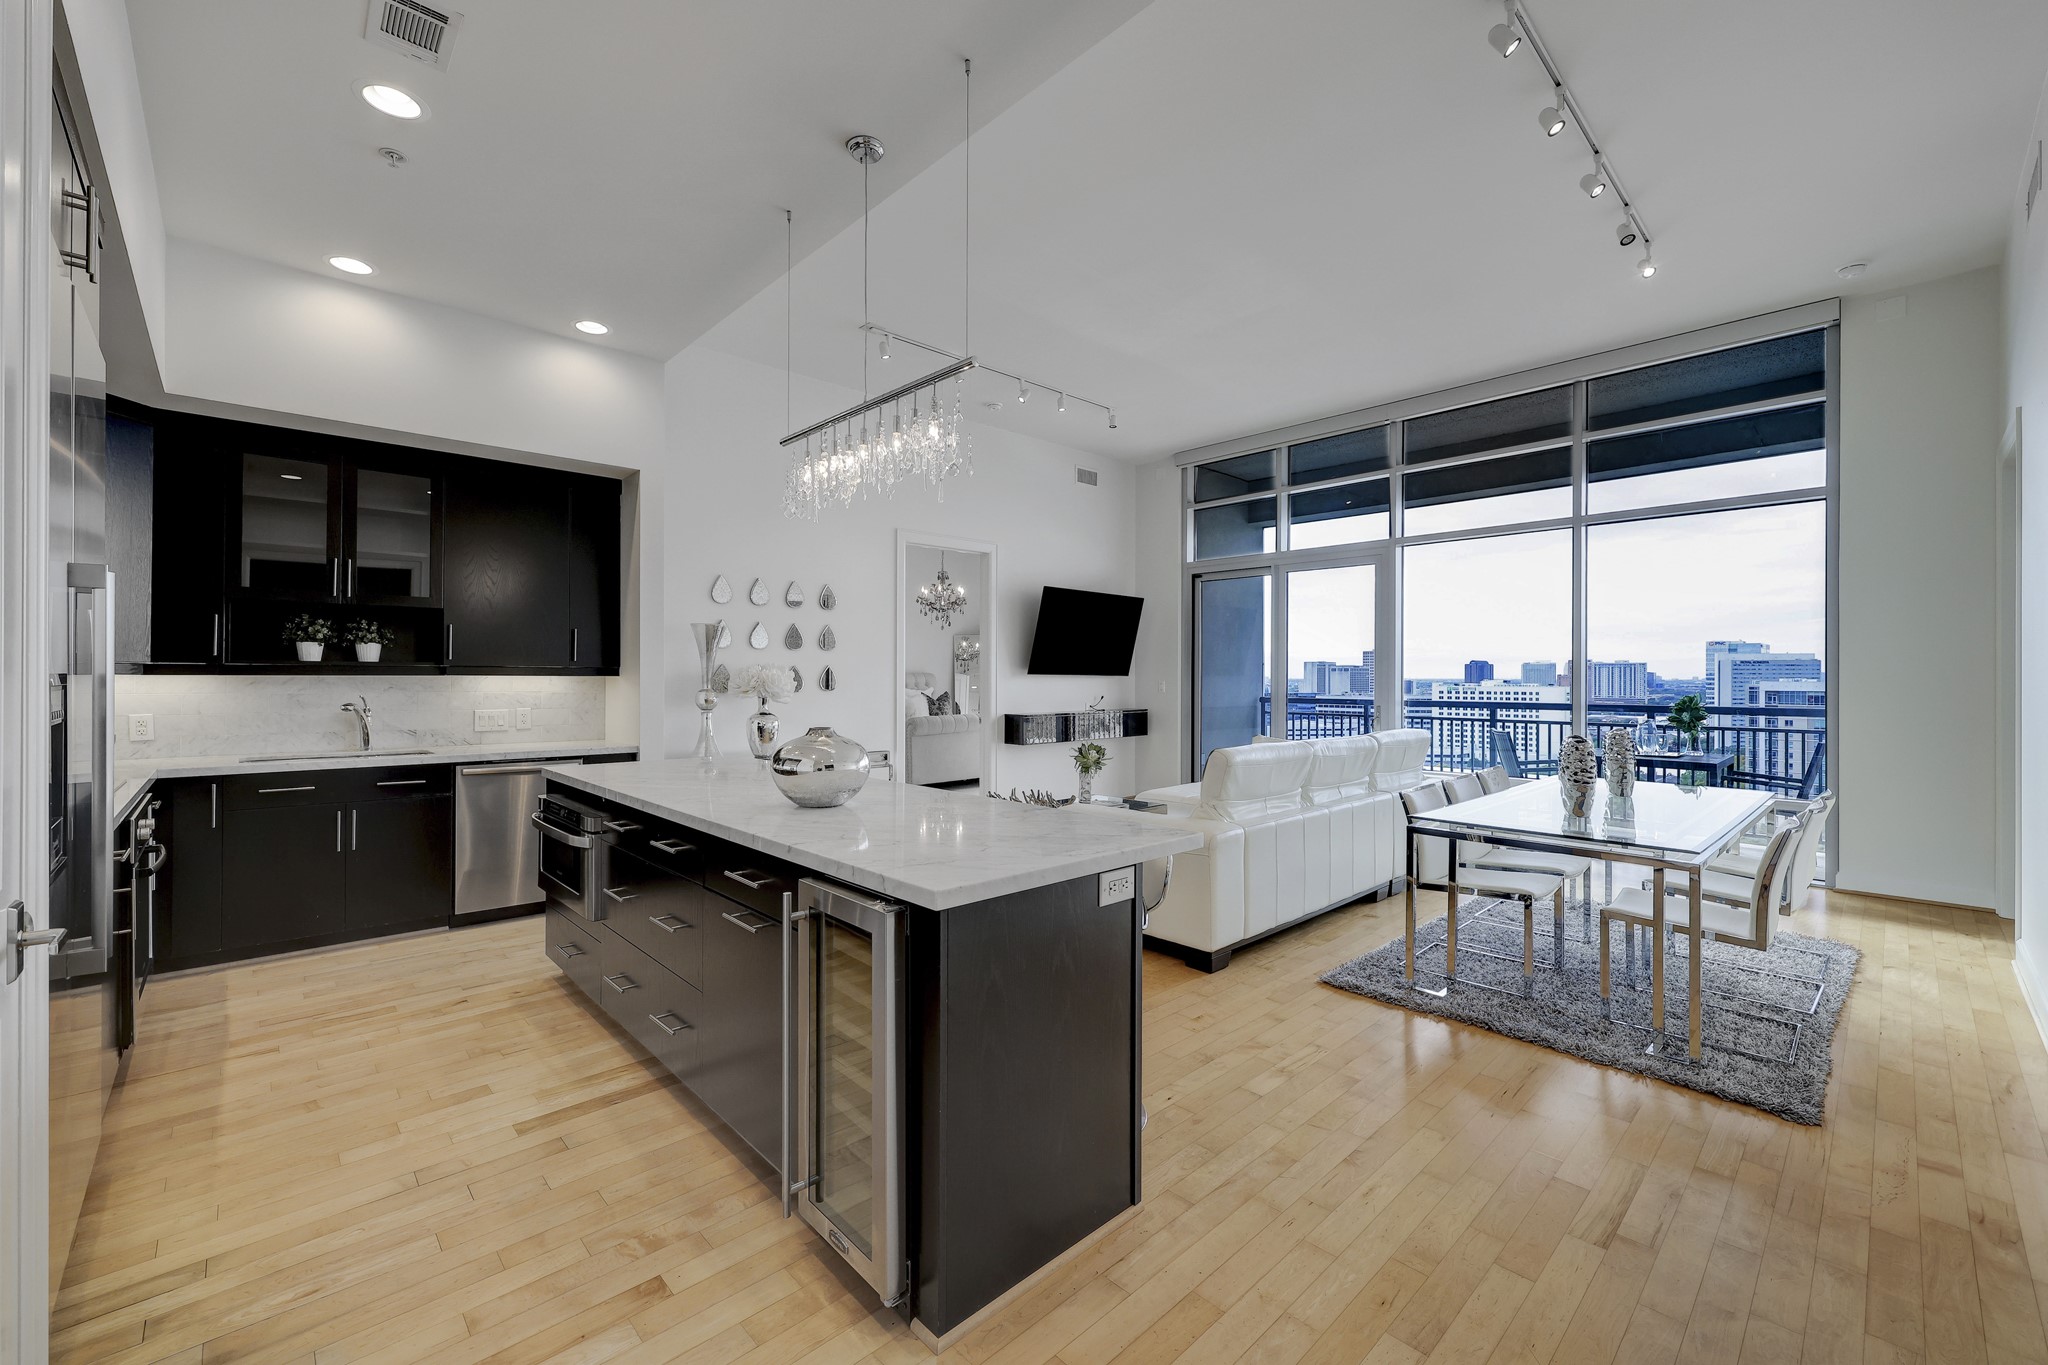 Embrace a luxurious lifestyle in this exceptional penthouse condominium in hidden gem Inner Loop Highland Tower. The furnished residence is a blend of modern elegance with stylish updates including light wood floor, crisp white walls, marble countertops and top of the line appliances.